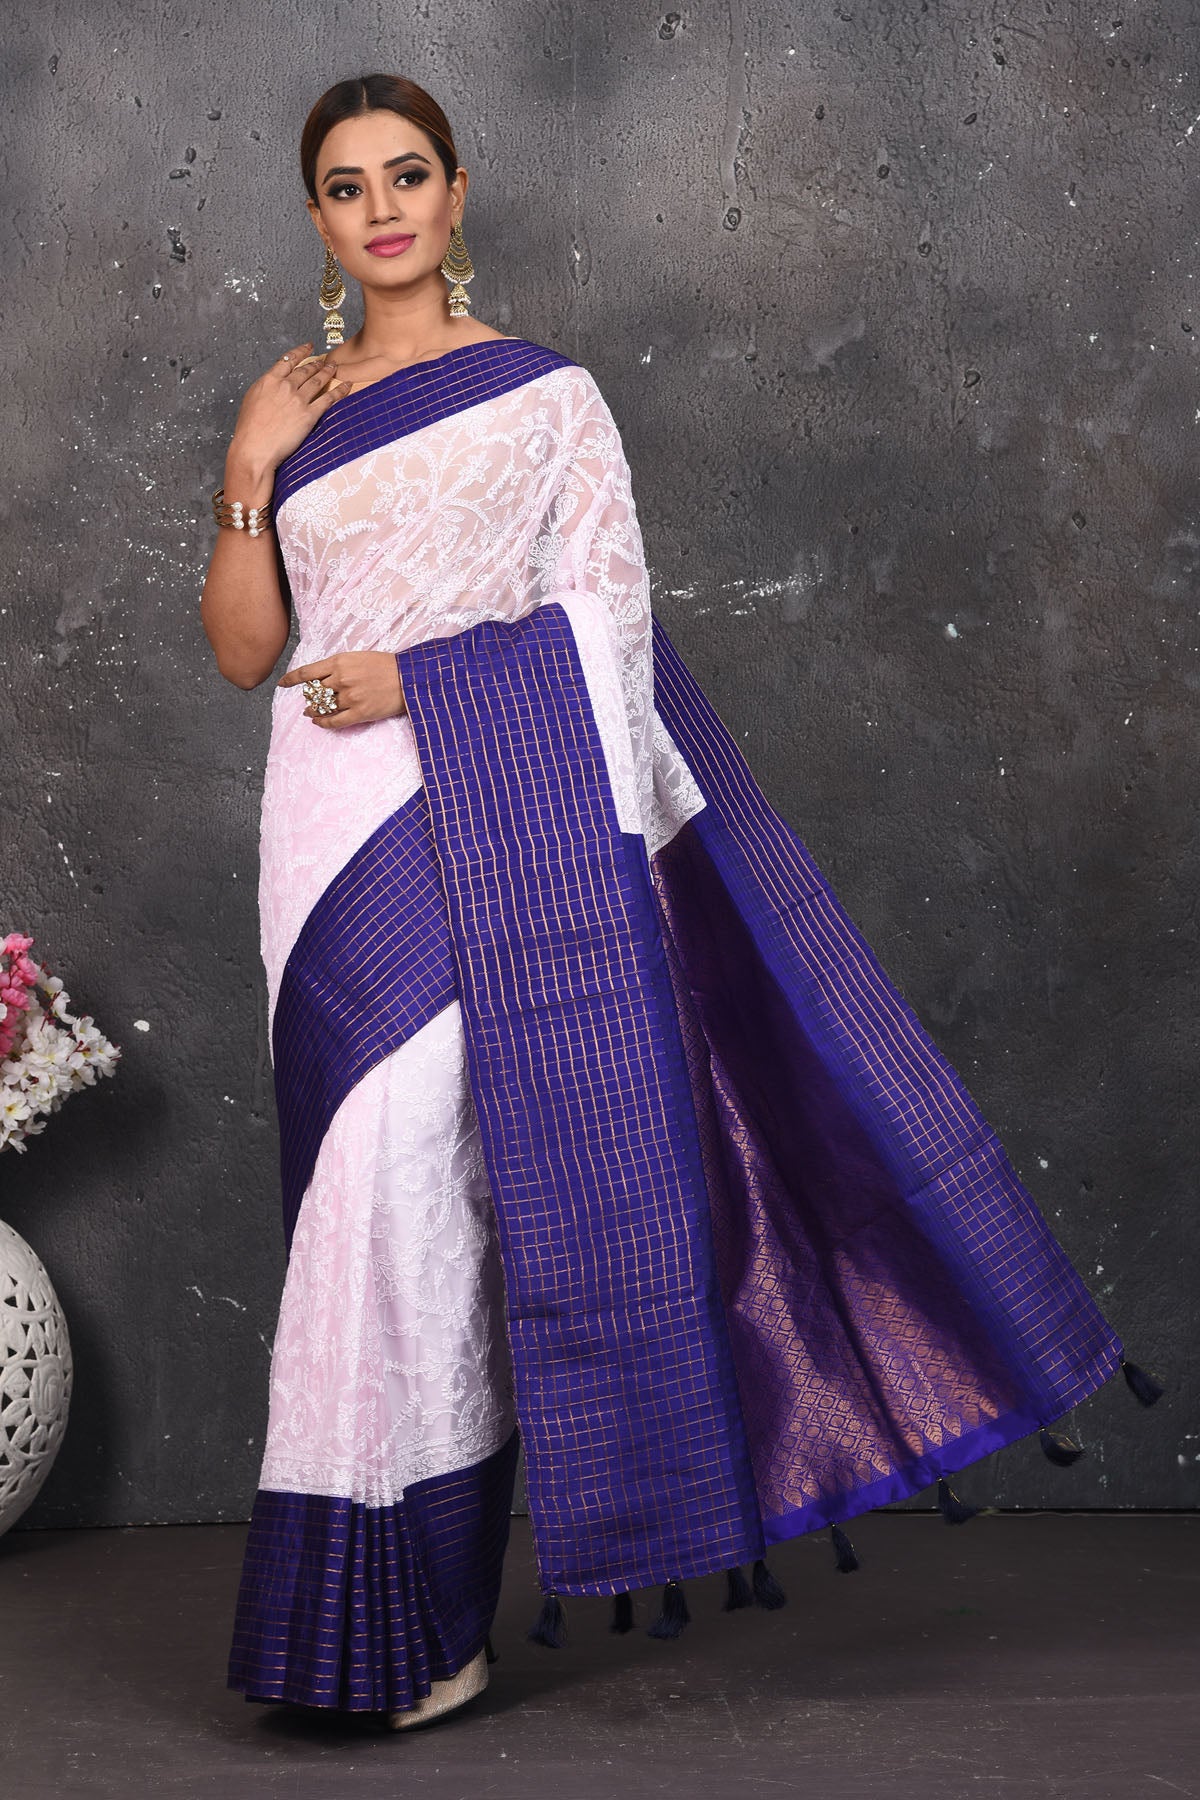 Buy this exquisite Off-white and violet chiffon saree with chikankari hand-embroidered online in USA. Style this lucknawi sari with a potli bag and high heels for a flawless look which has gorgeous heavy pallu with dull-gold zari work. This saree is definitely the epitome of beauty and a must have in your collection. Buy designer handwoven chikankari sari with any blouse from Pure Elegance Indian saree store in USA.- Full view.